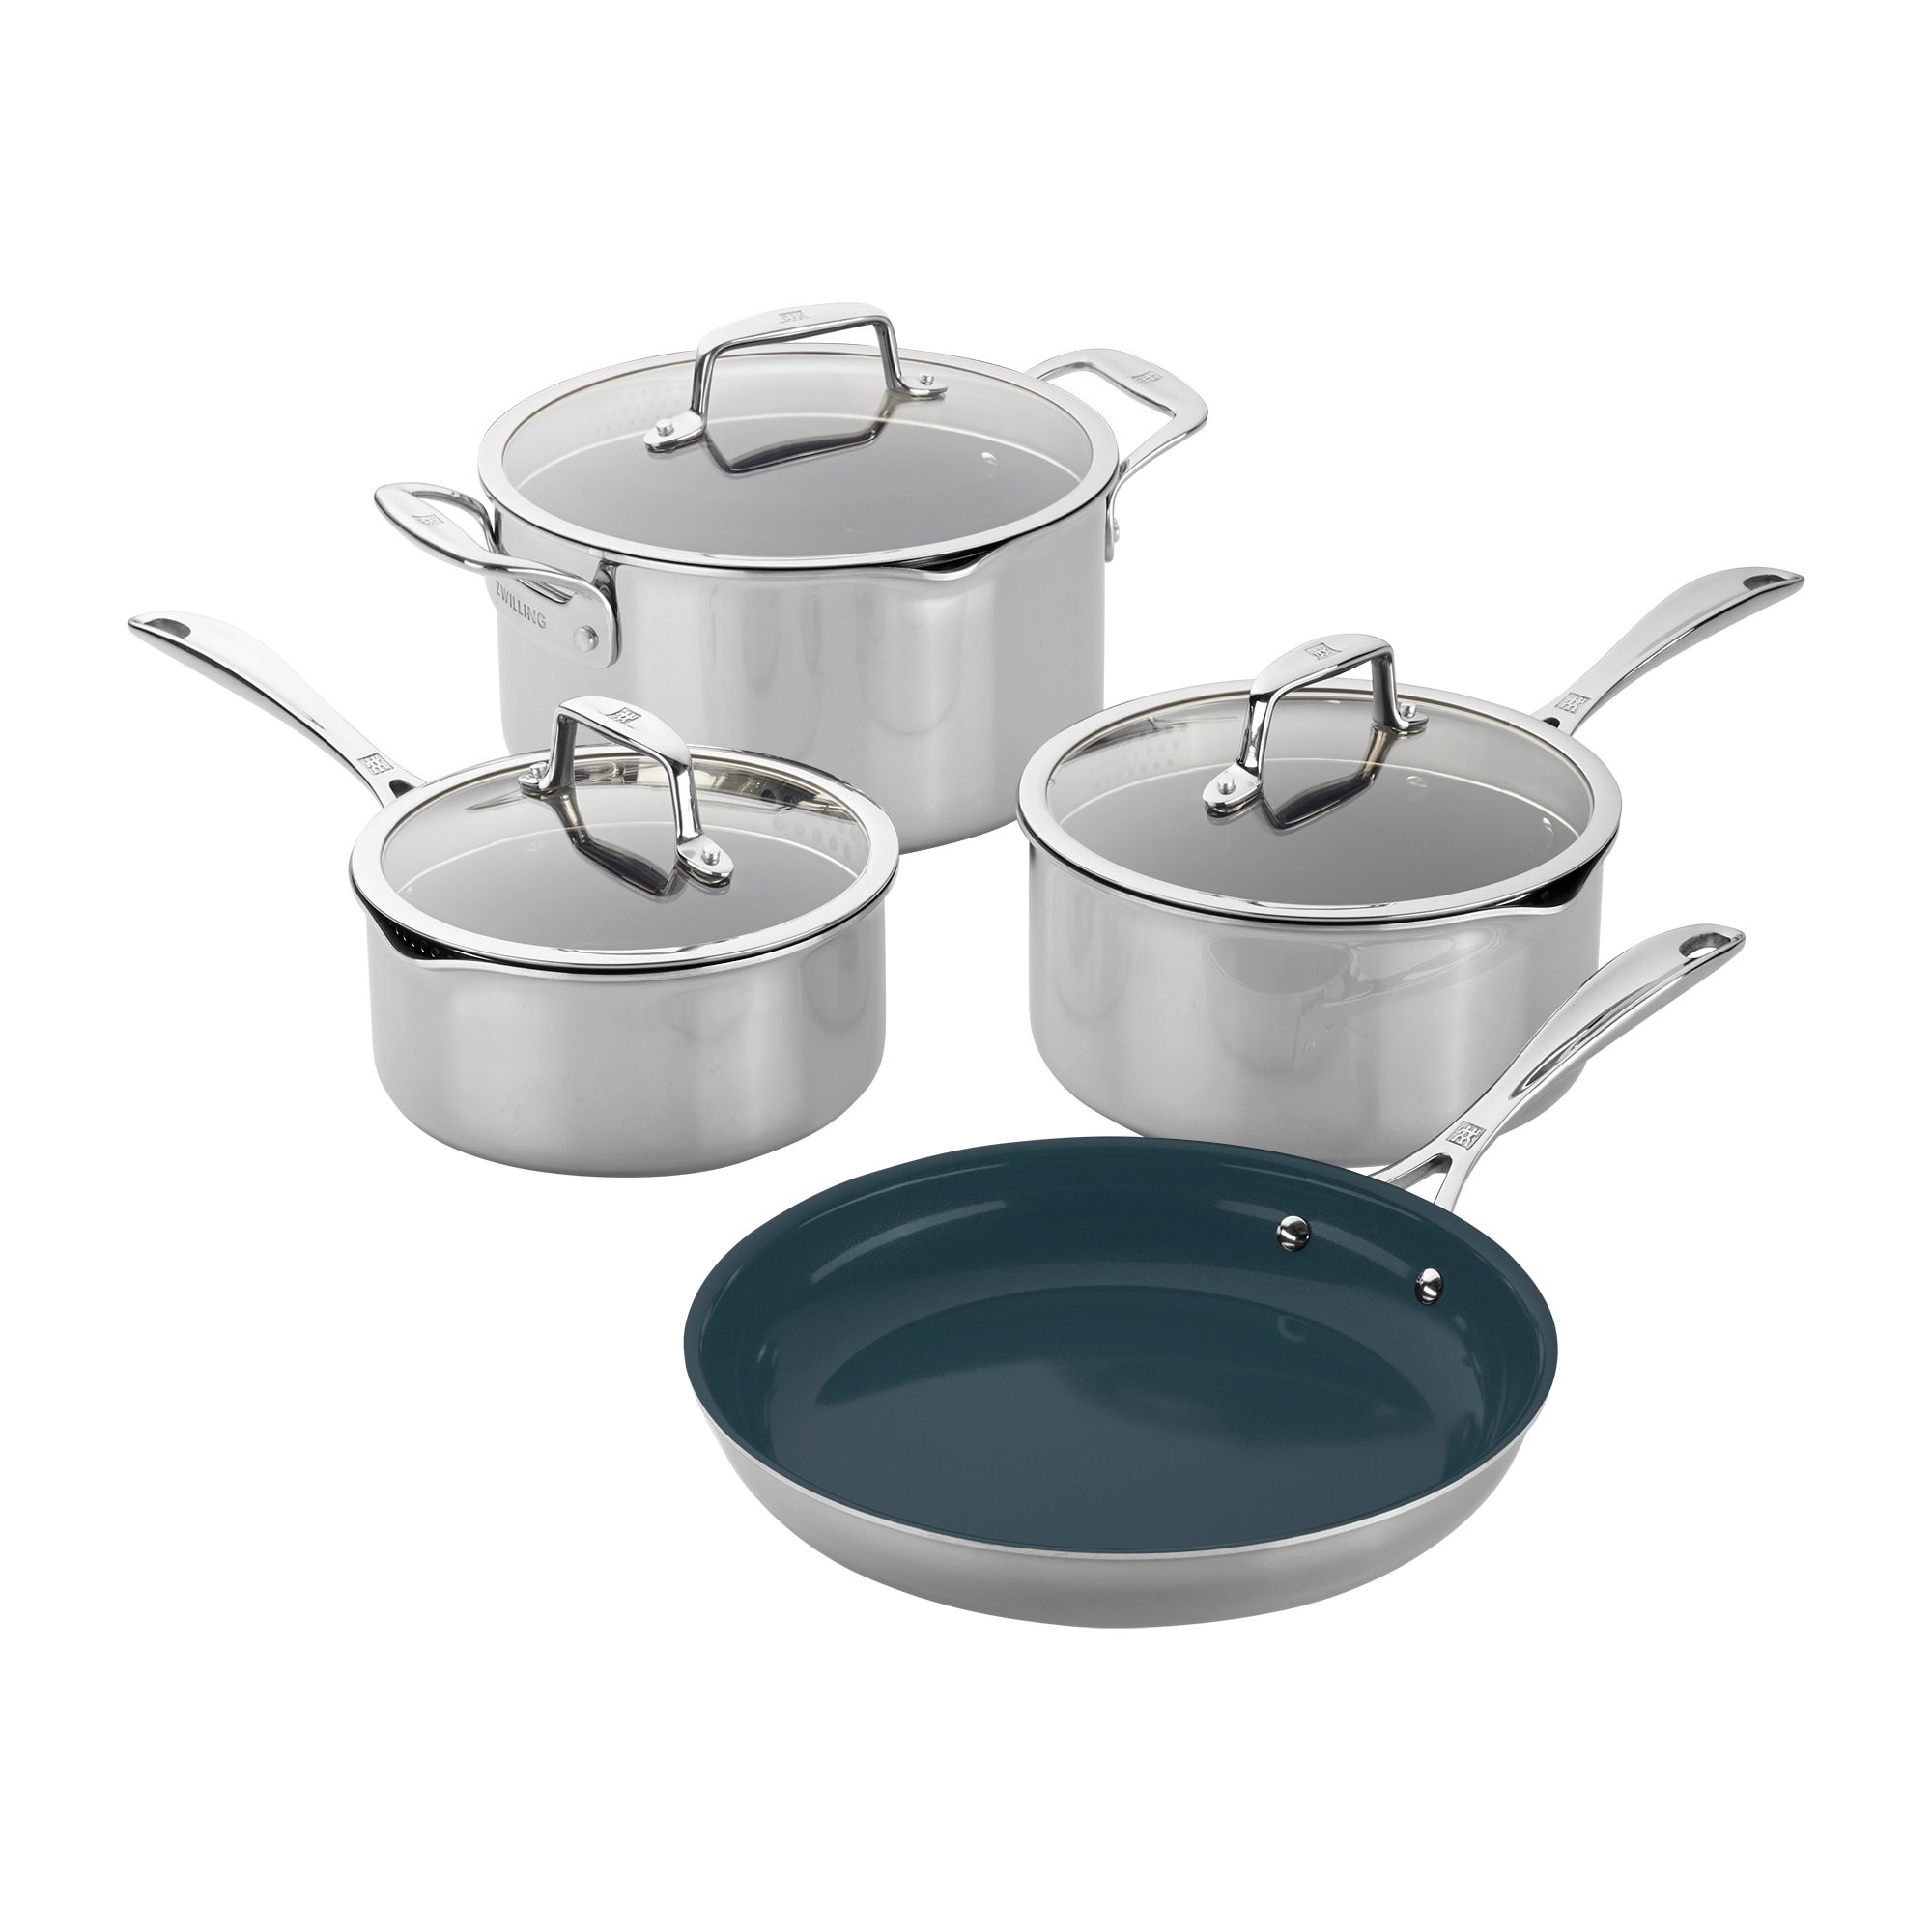 https://ak1.ostkcdn.com/images/products/is/images/direct/280ea6d9fd3b04ec5537ee5652477110f06b4081/ZWILLING-Clad-CFX-Stainless-Steel-Ceramic-Nonstick-Cookware-Set.jpg